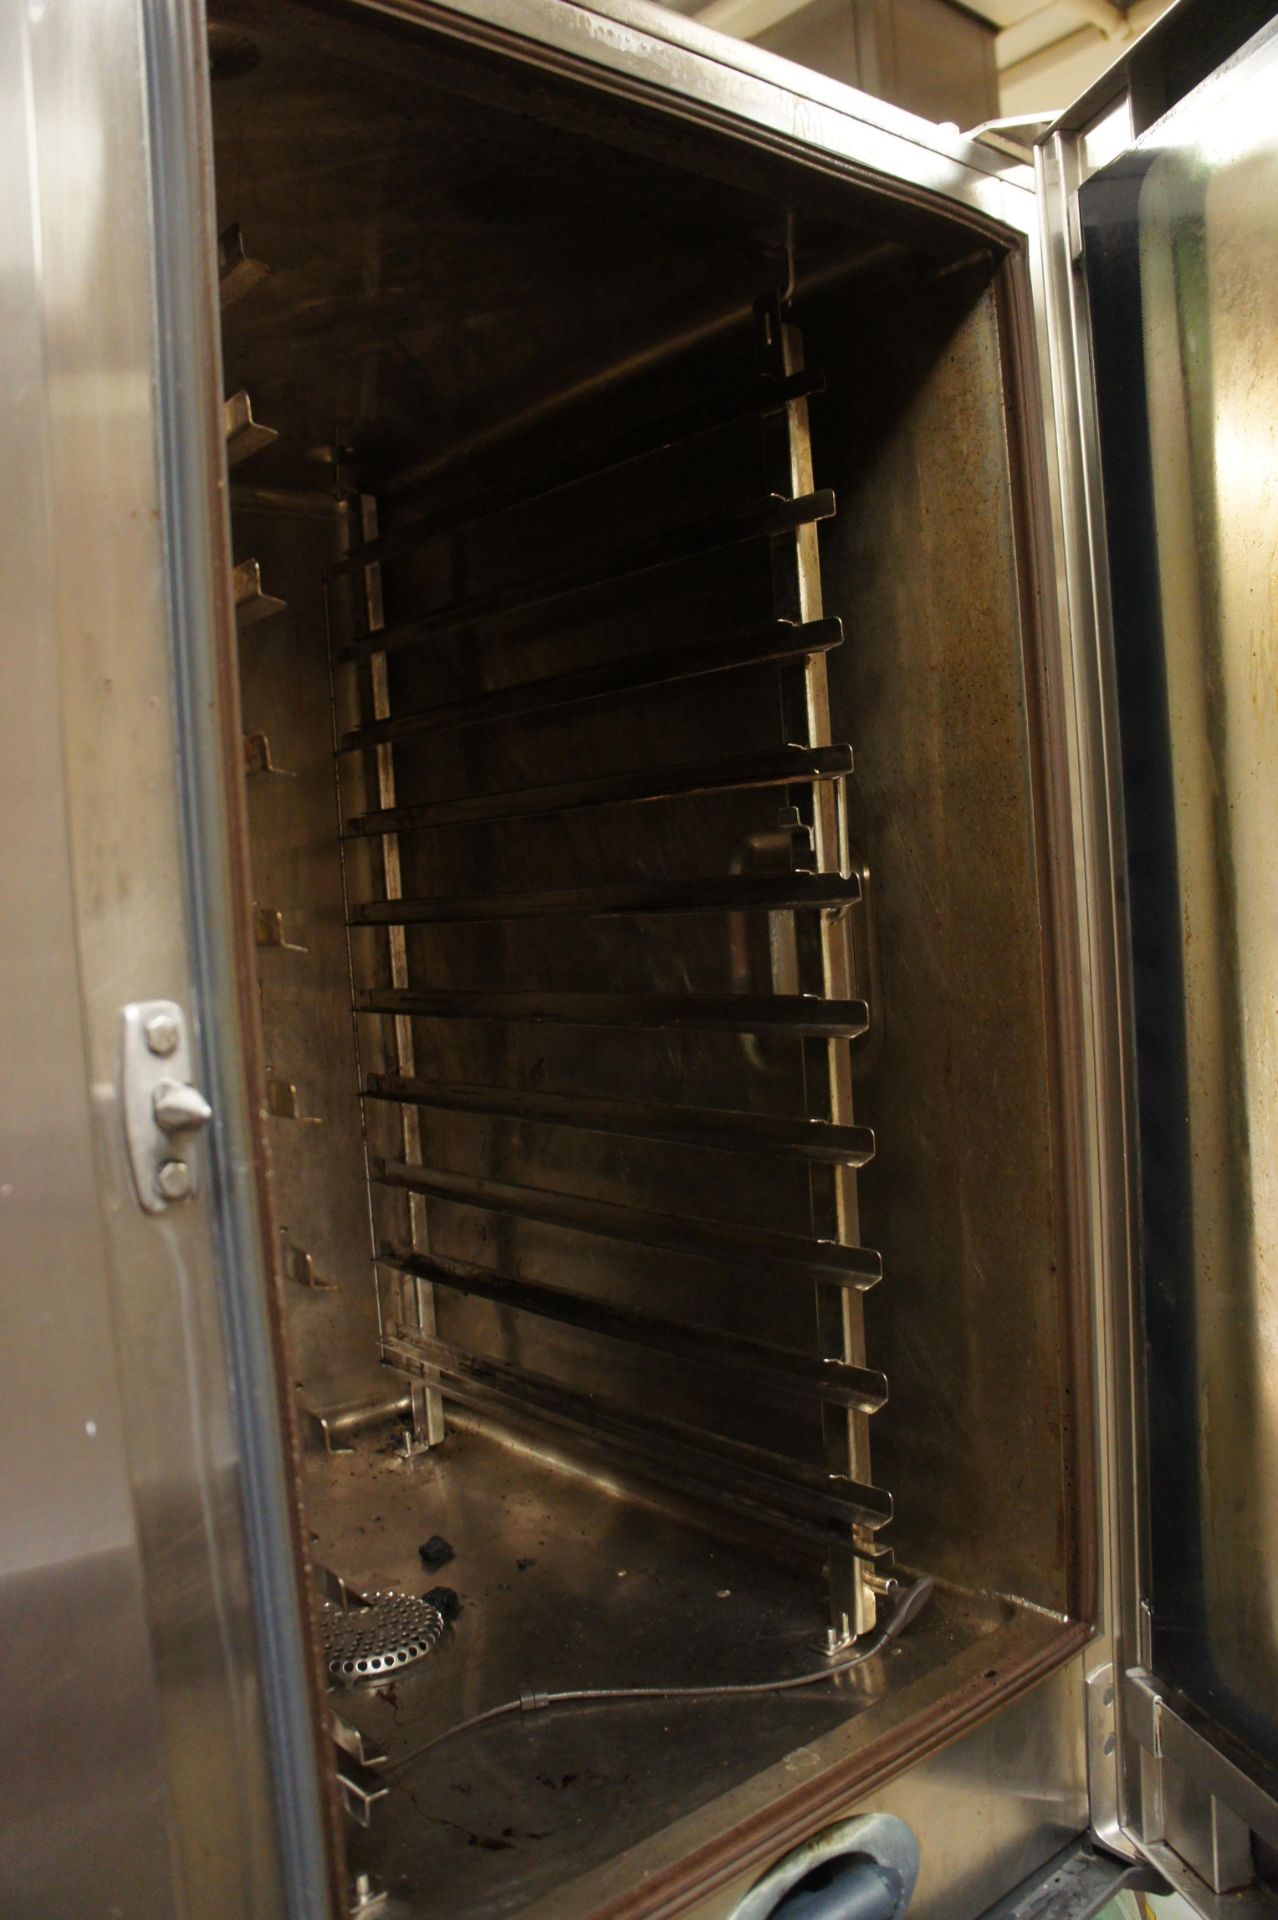 Rational CombiMaster CM101G gas oven - Image 2 of 3